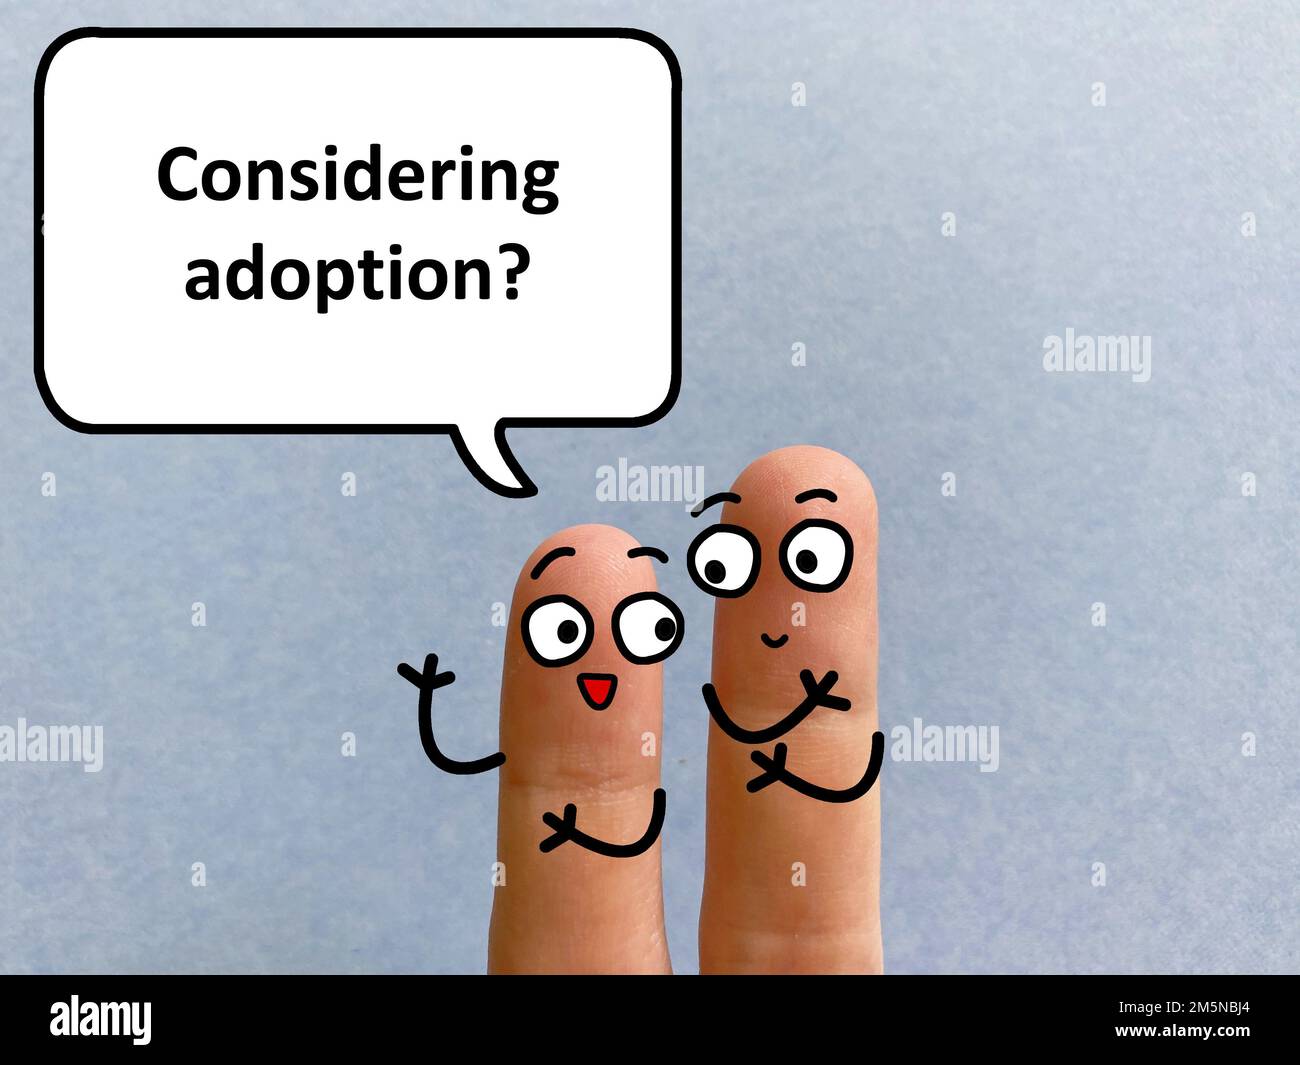 Two fingers are decorated as two person. One of them is asking another if he is considering adoption. Stock Photo